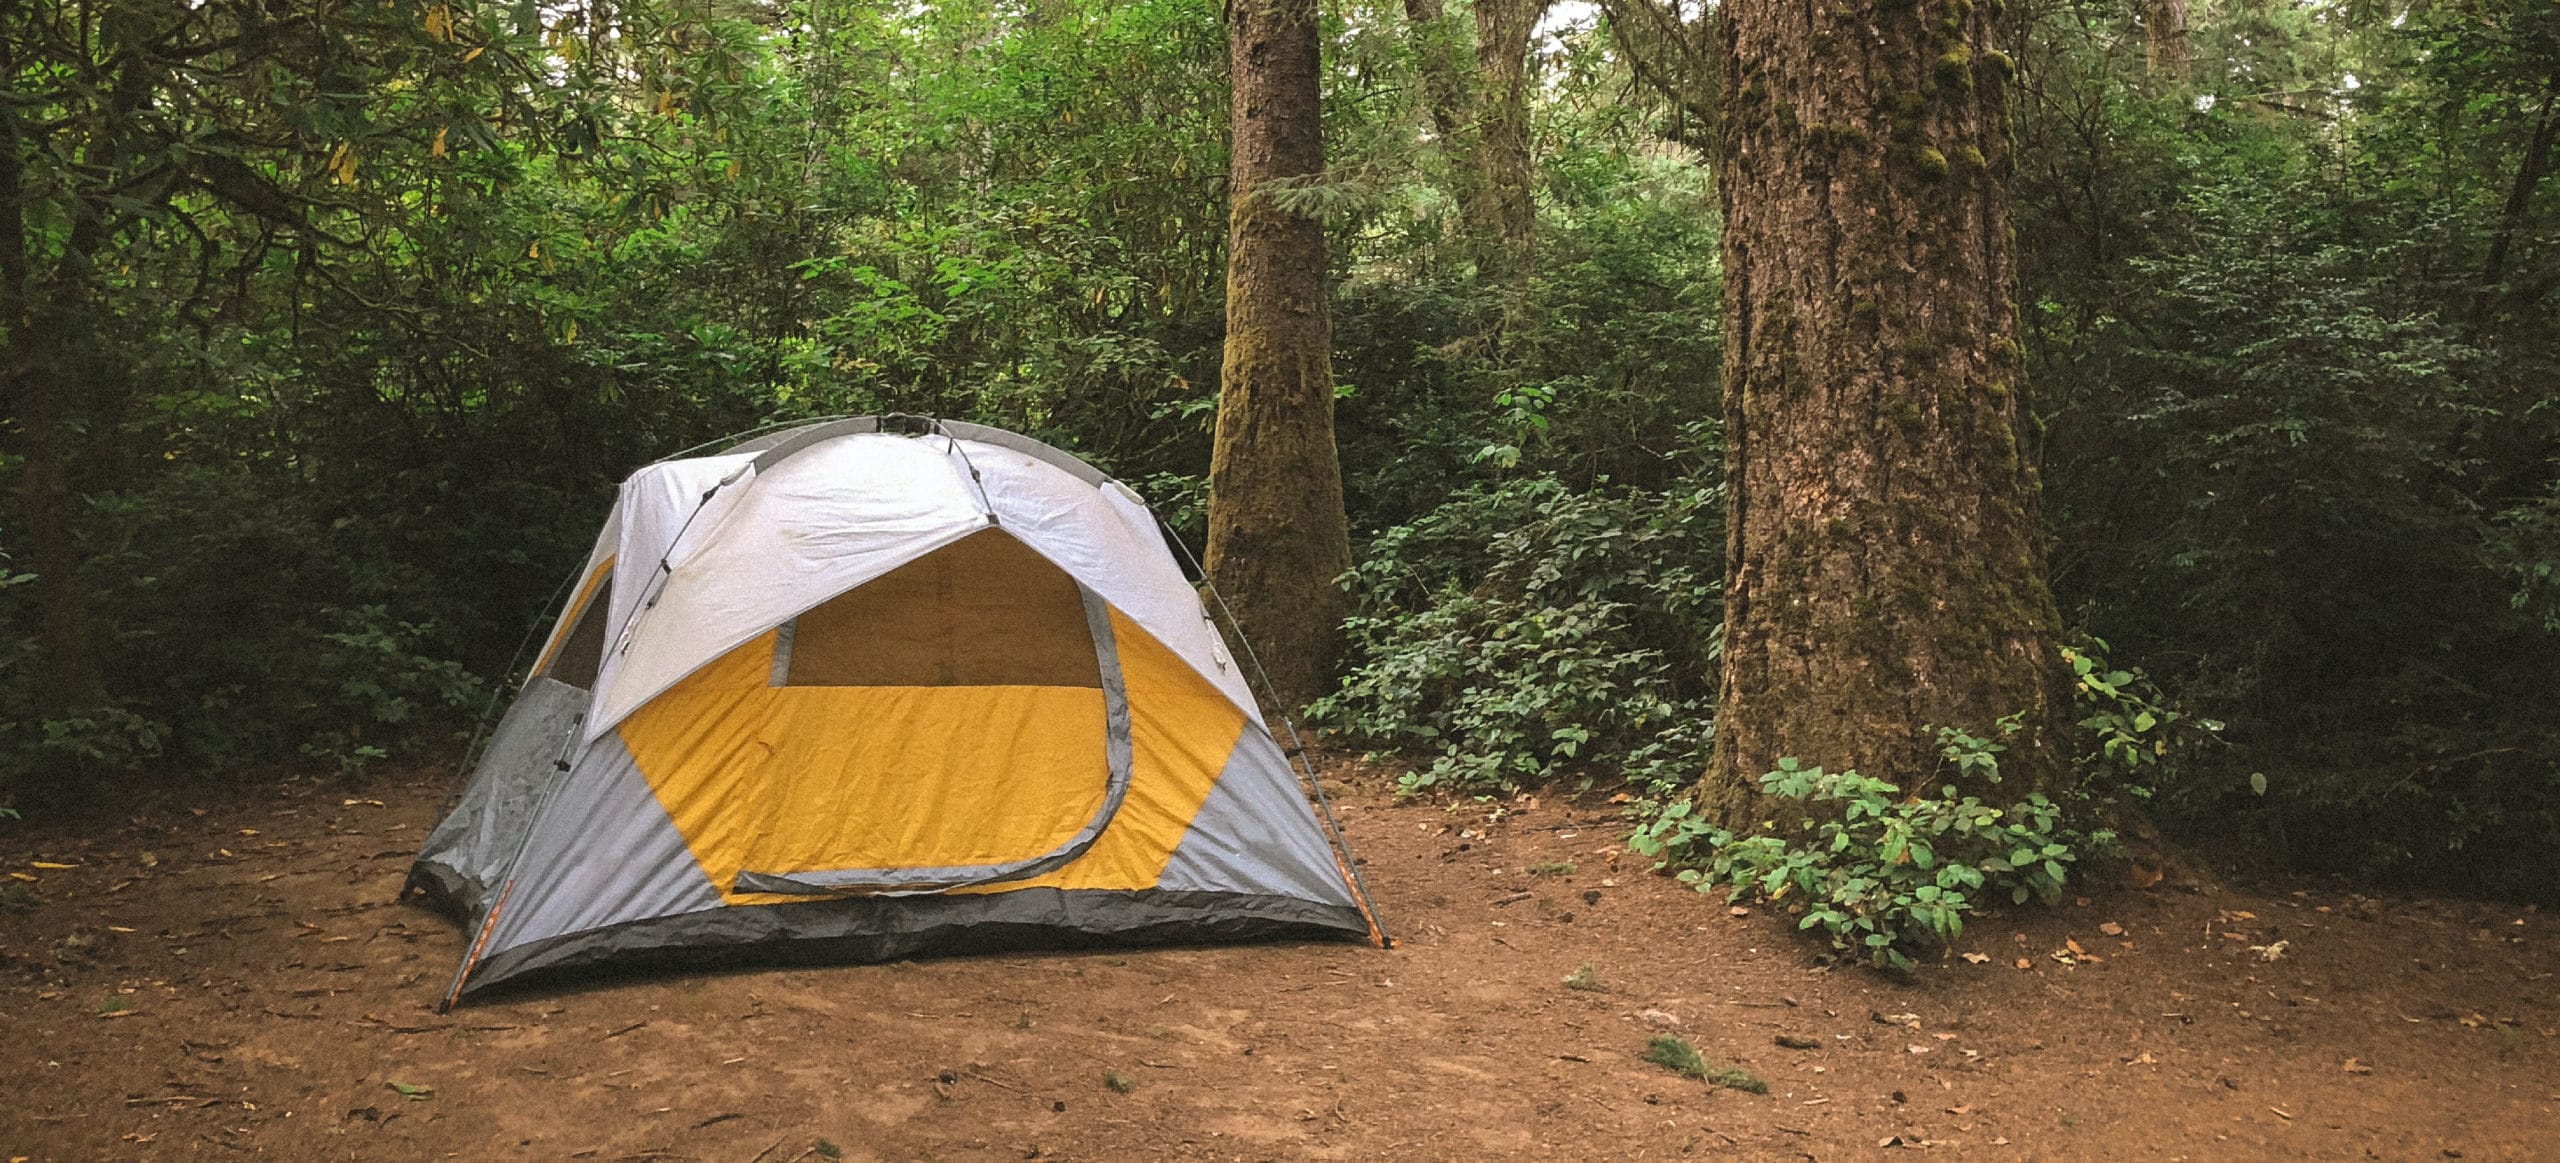 tent set up in a woodland clearing